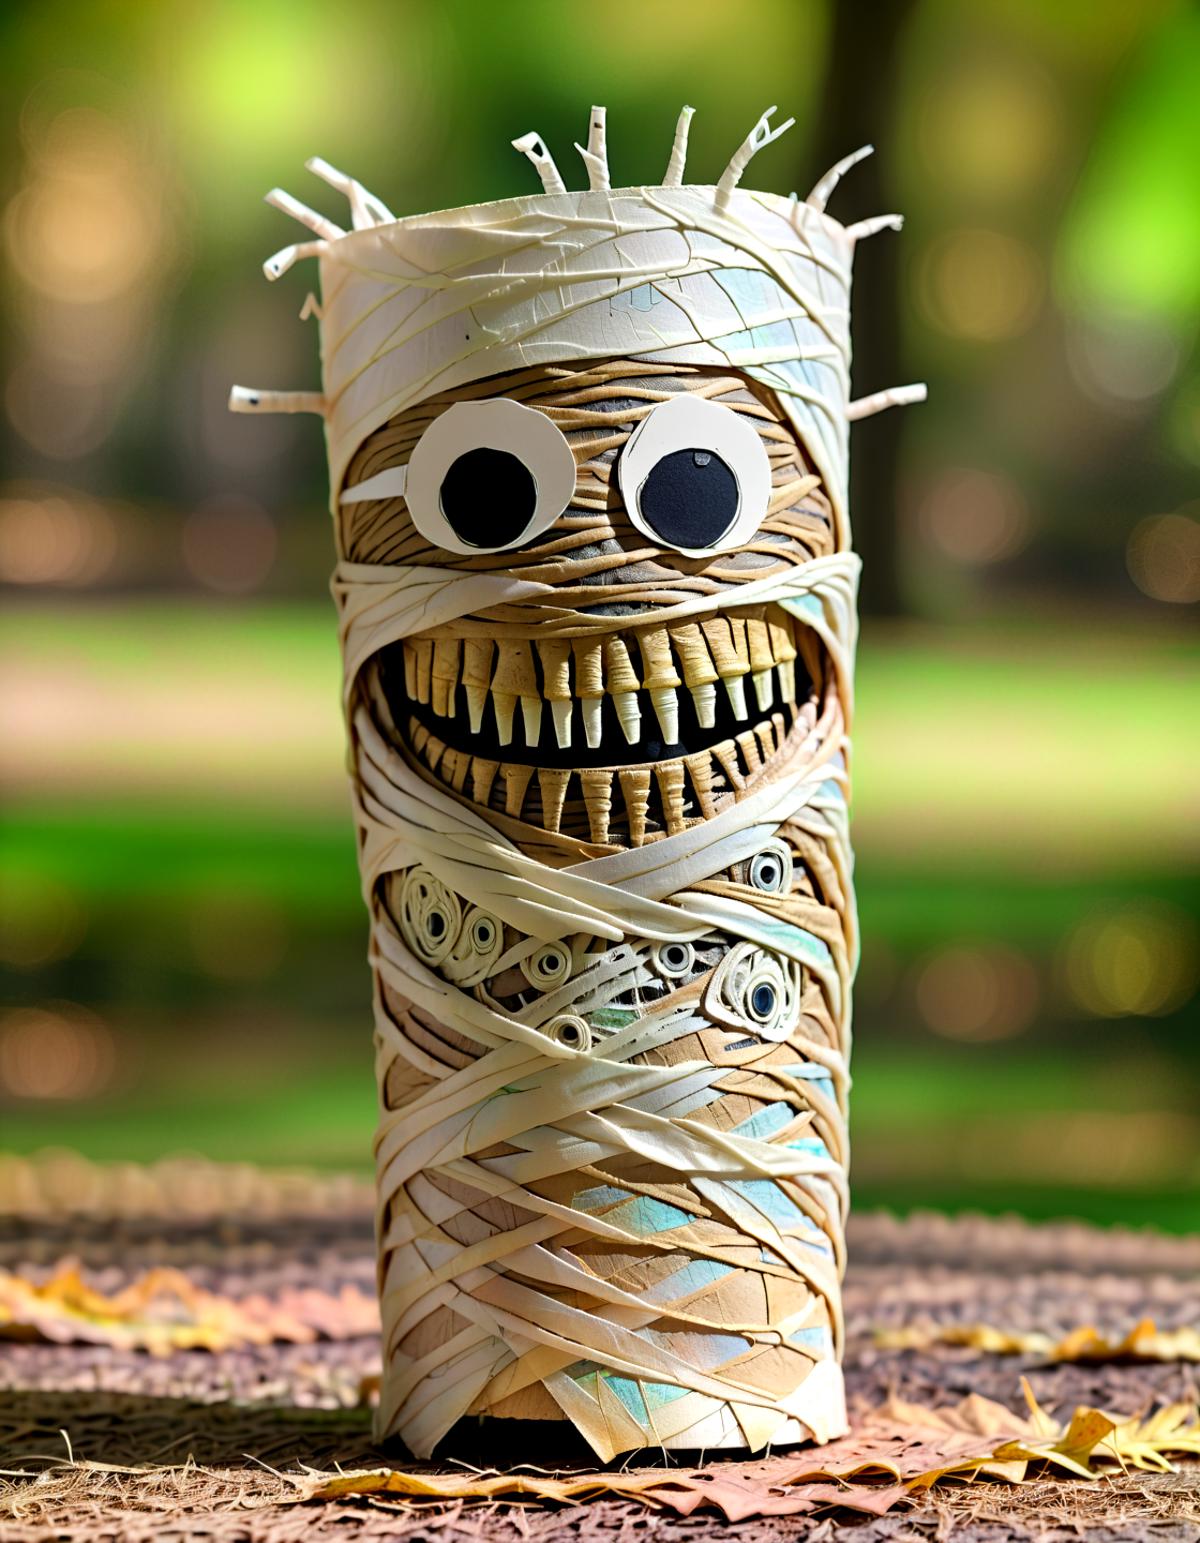 DIY Toilet Paper Roll Craft [SDXL] image by denrakeiw